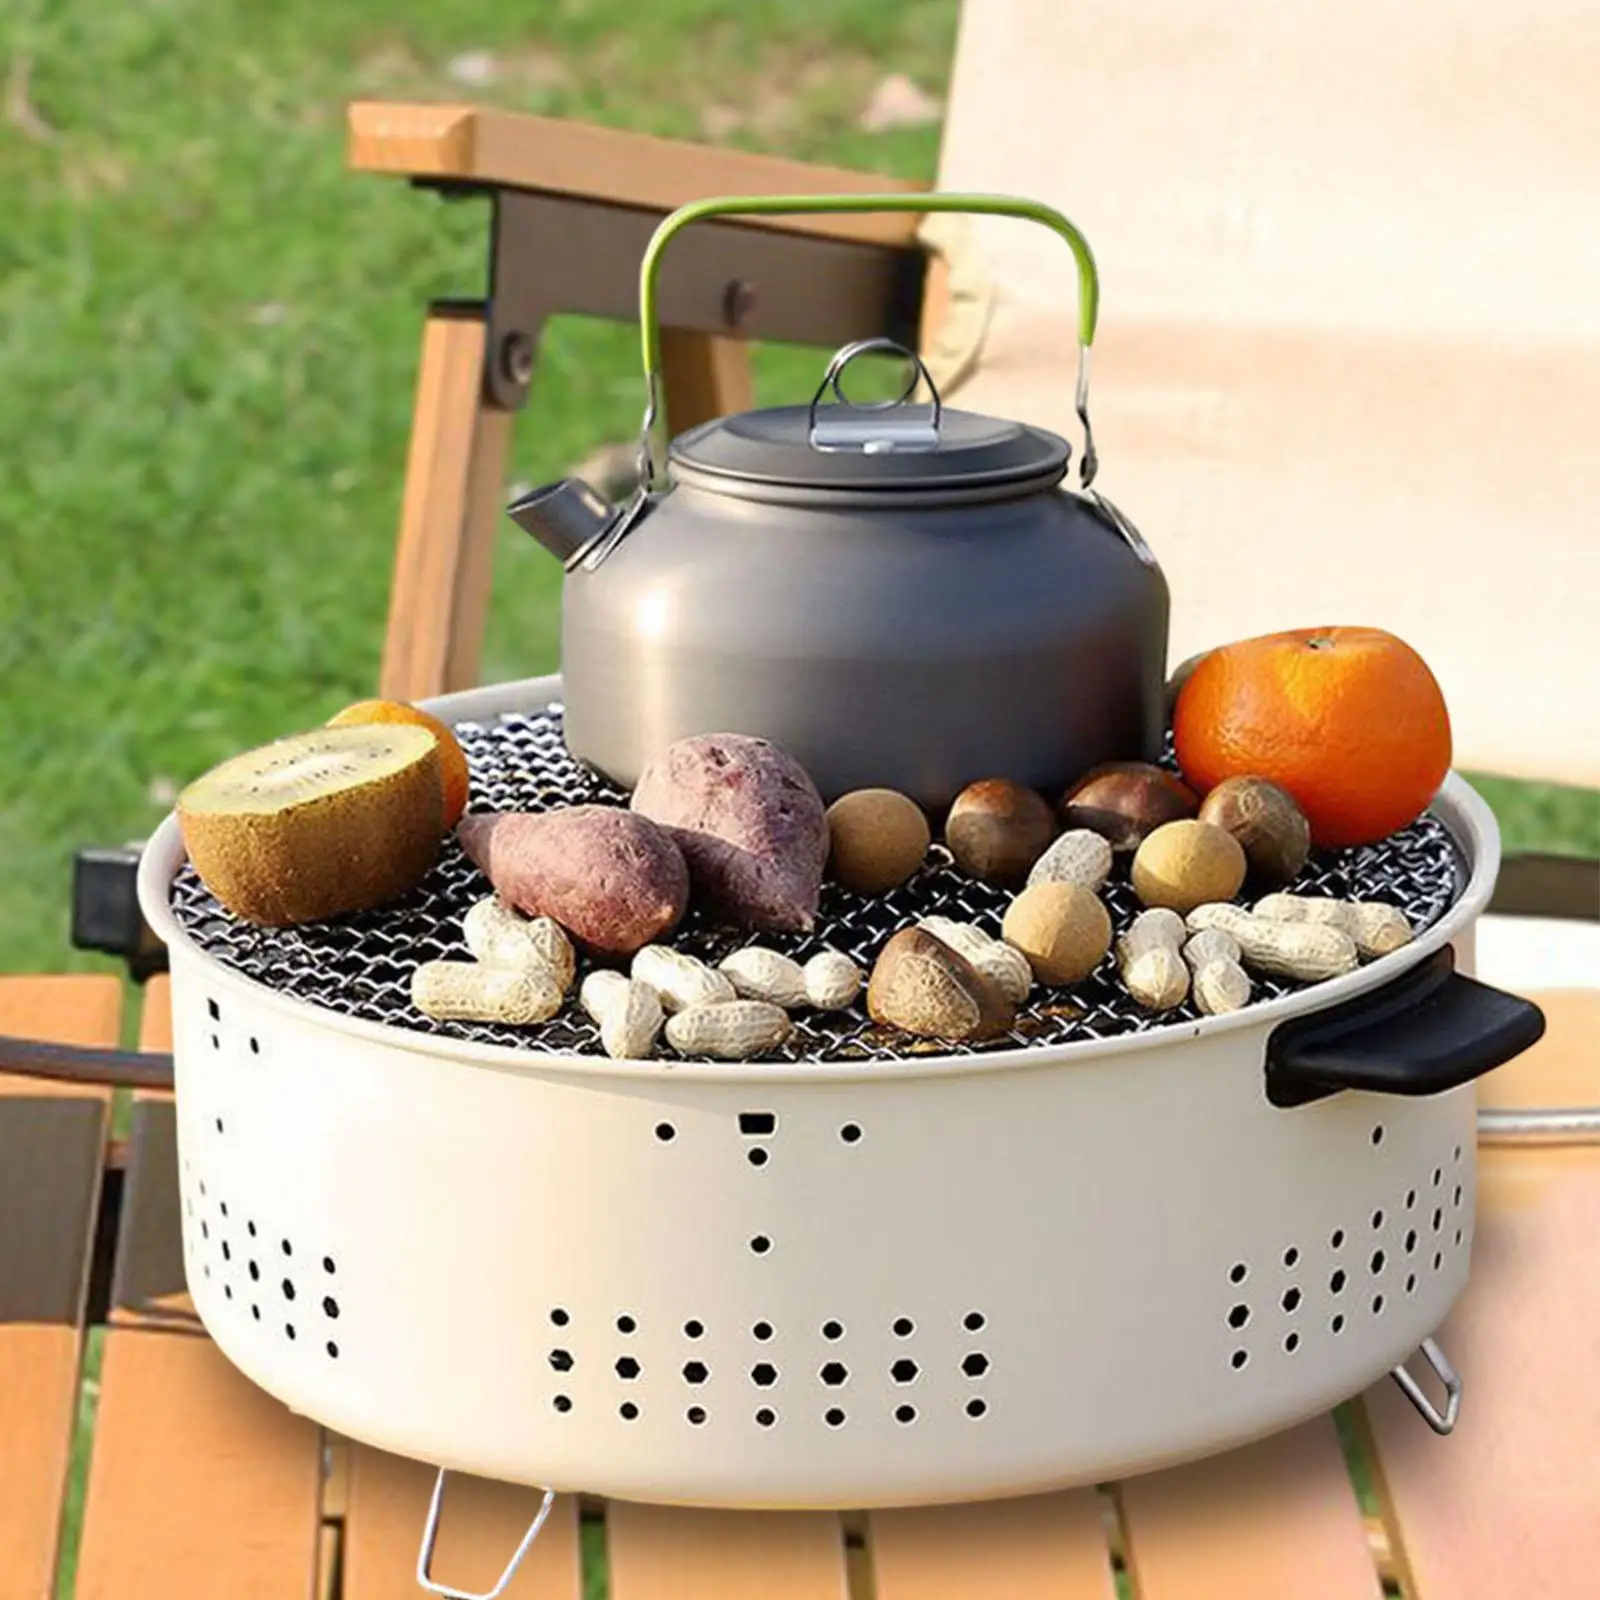 Tabletop Stove Portable Charcoal Grill for Outside Cooking Outdoor Indoor